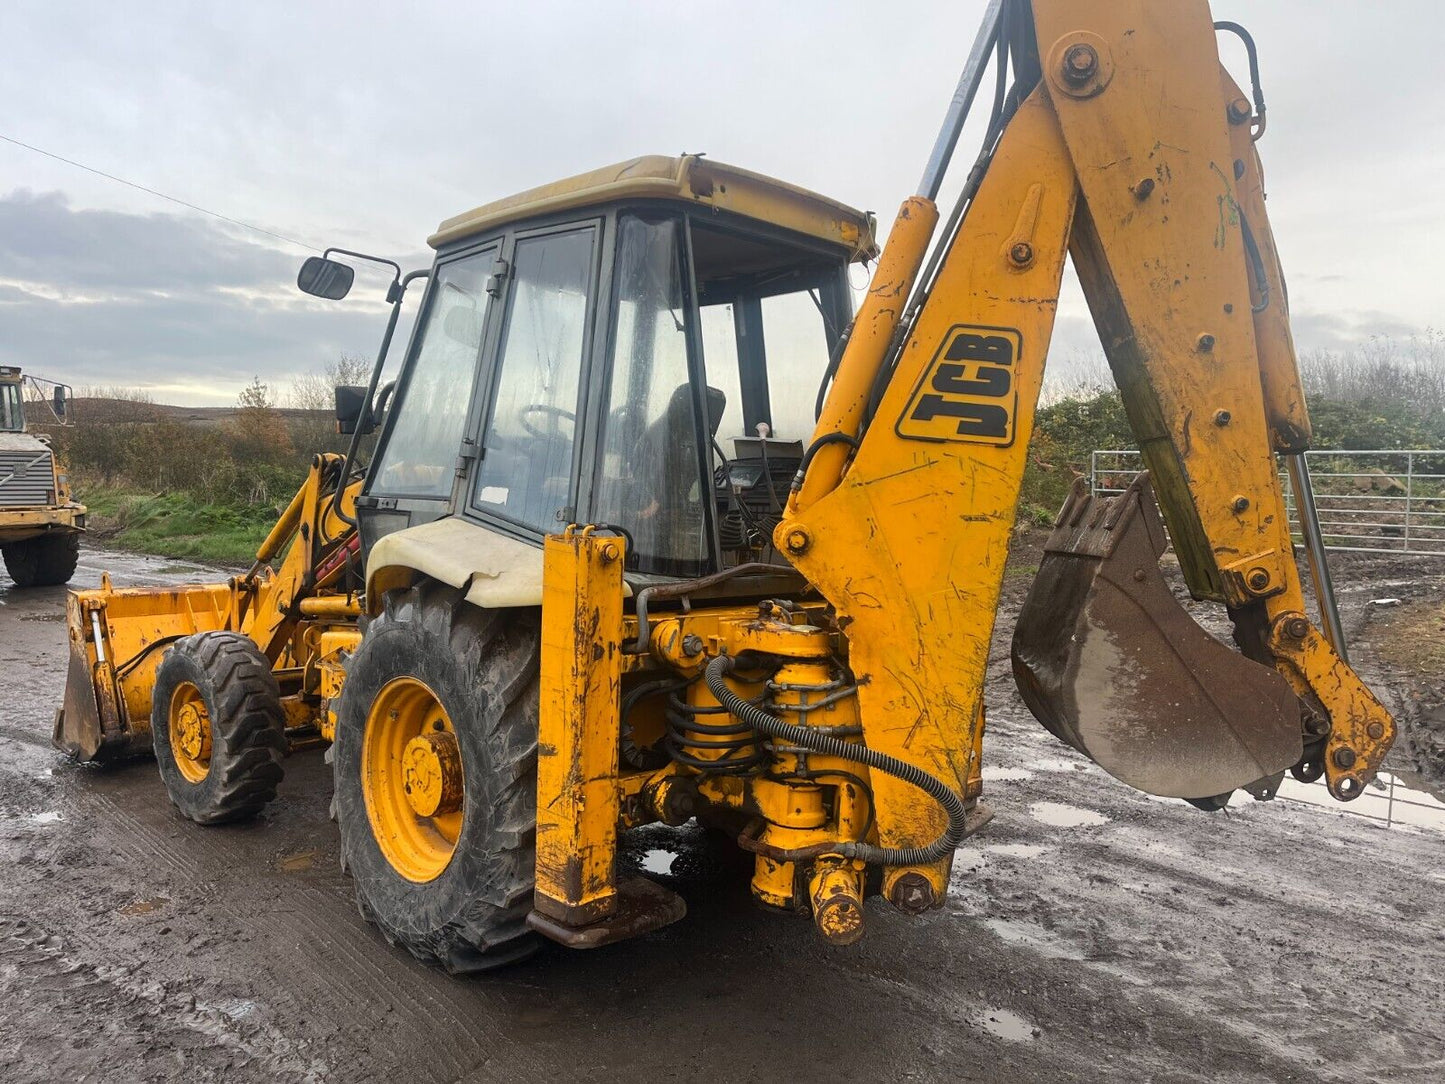 Bid on EFFICIENT POWER: PERKINS TURBO IN '96 JCB 3CX- Buy &amp; Sell on Auction with EAMA Group